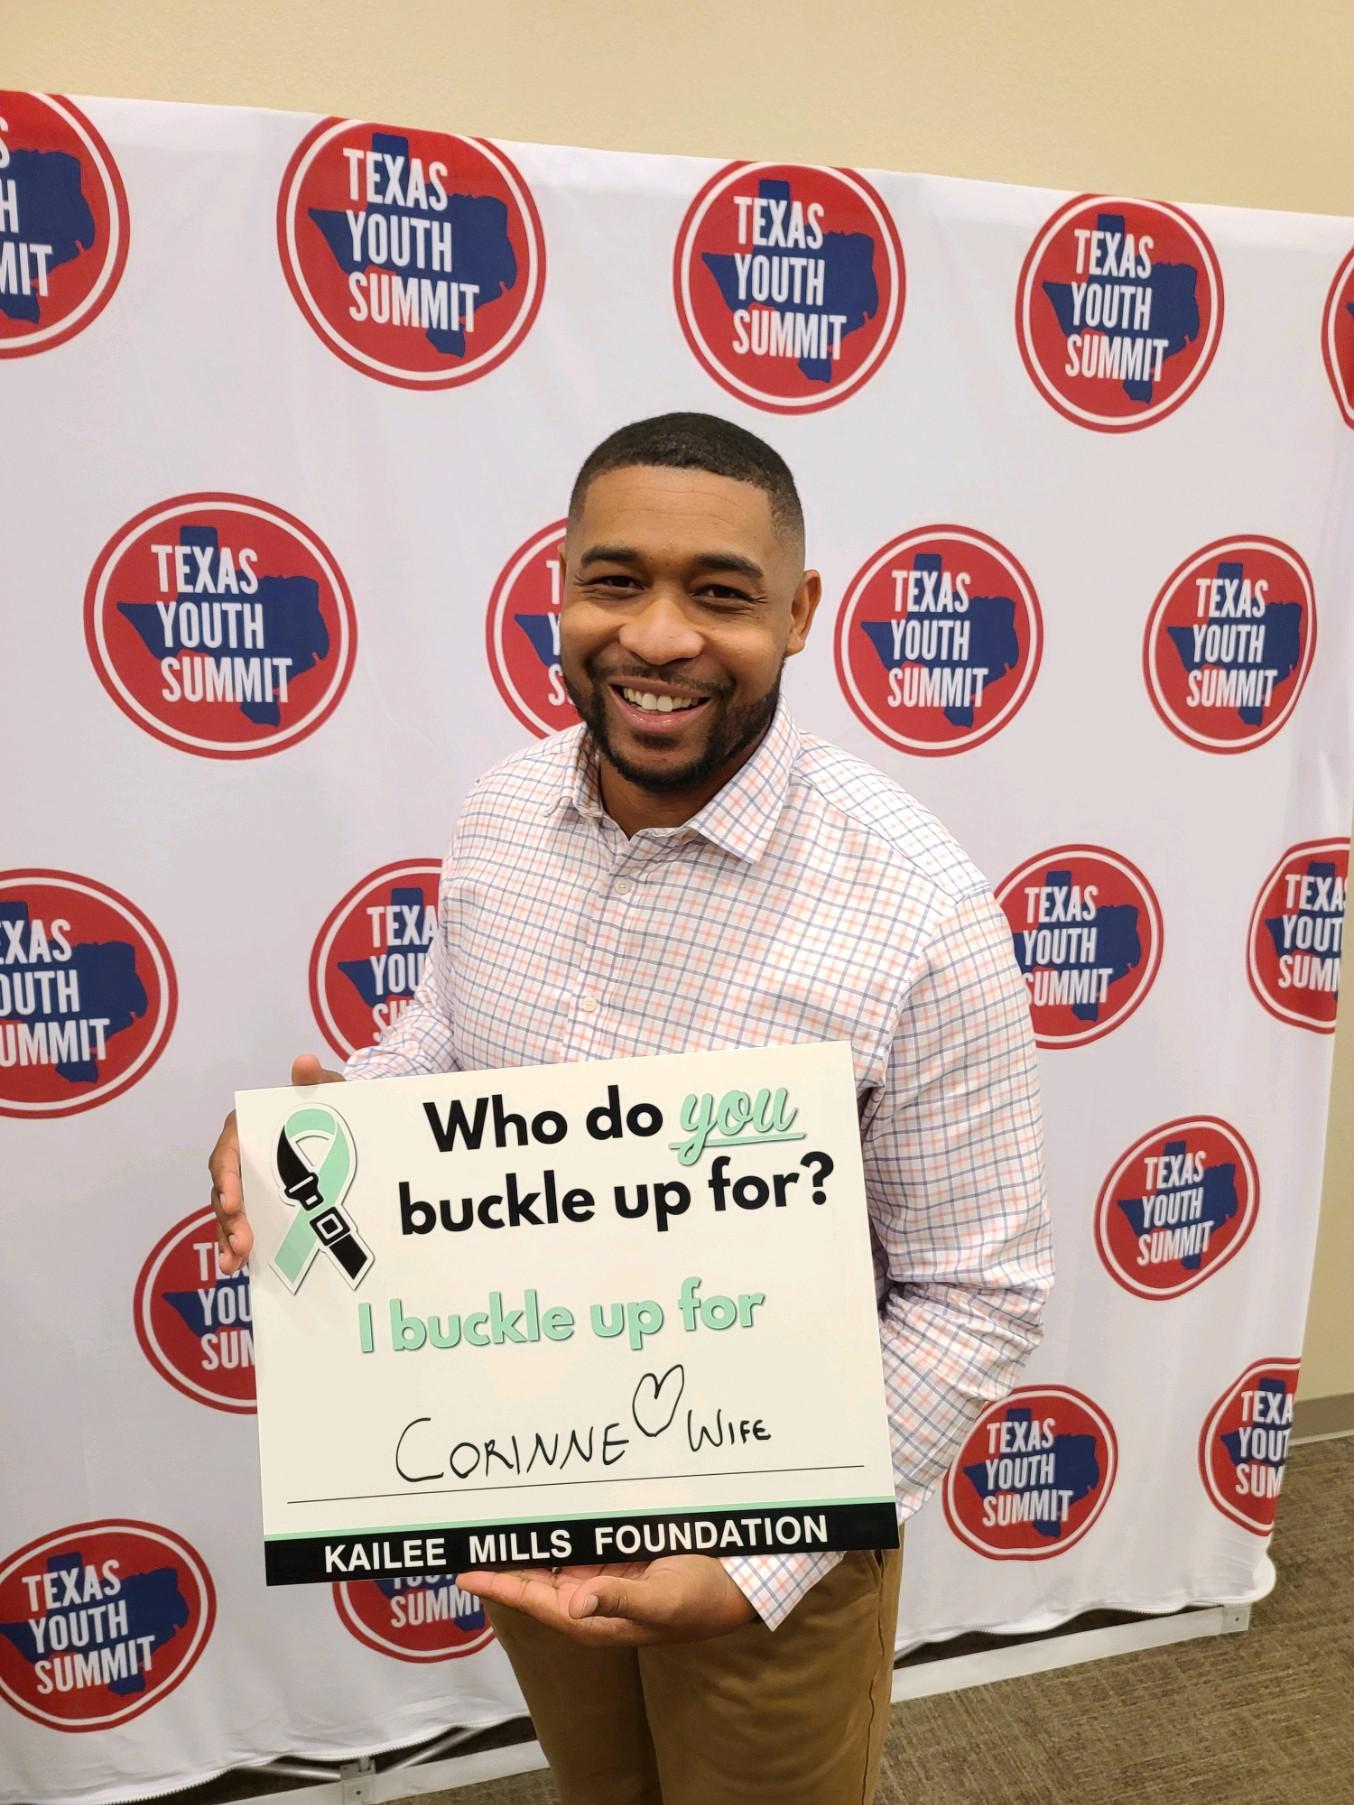 Who Do YOU Buckle Up For? - Kailee Mills Foundation